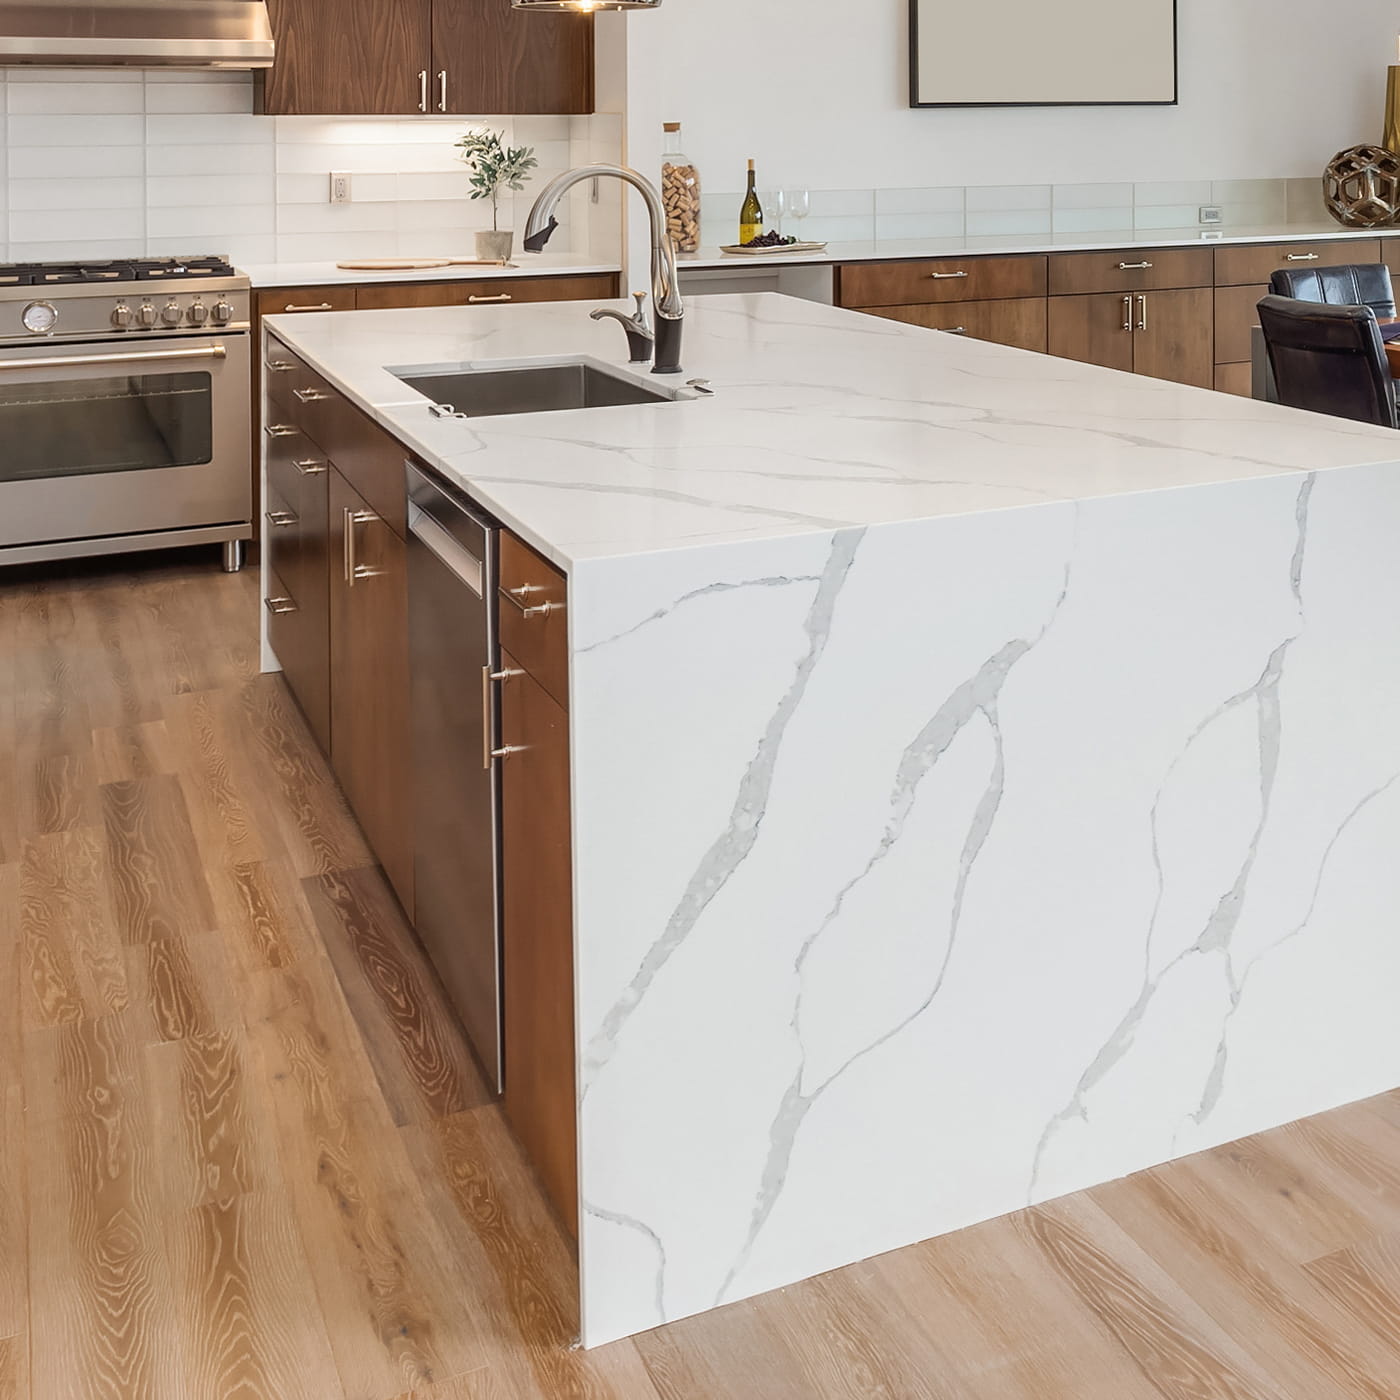 Westfield Granite and Quartz Countertops - Large Selection